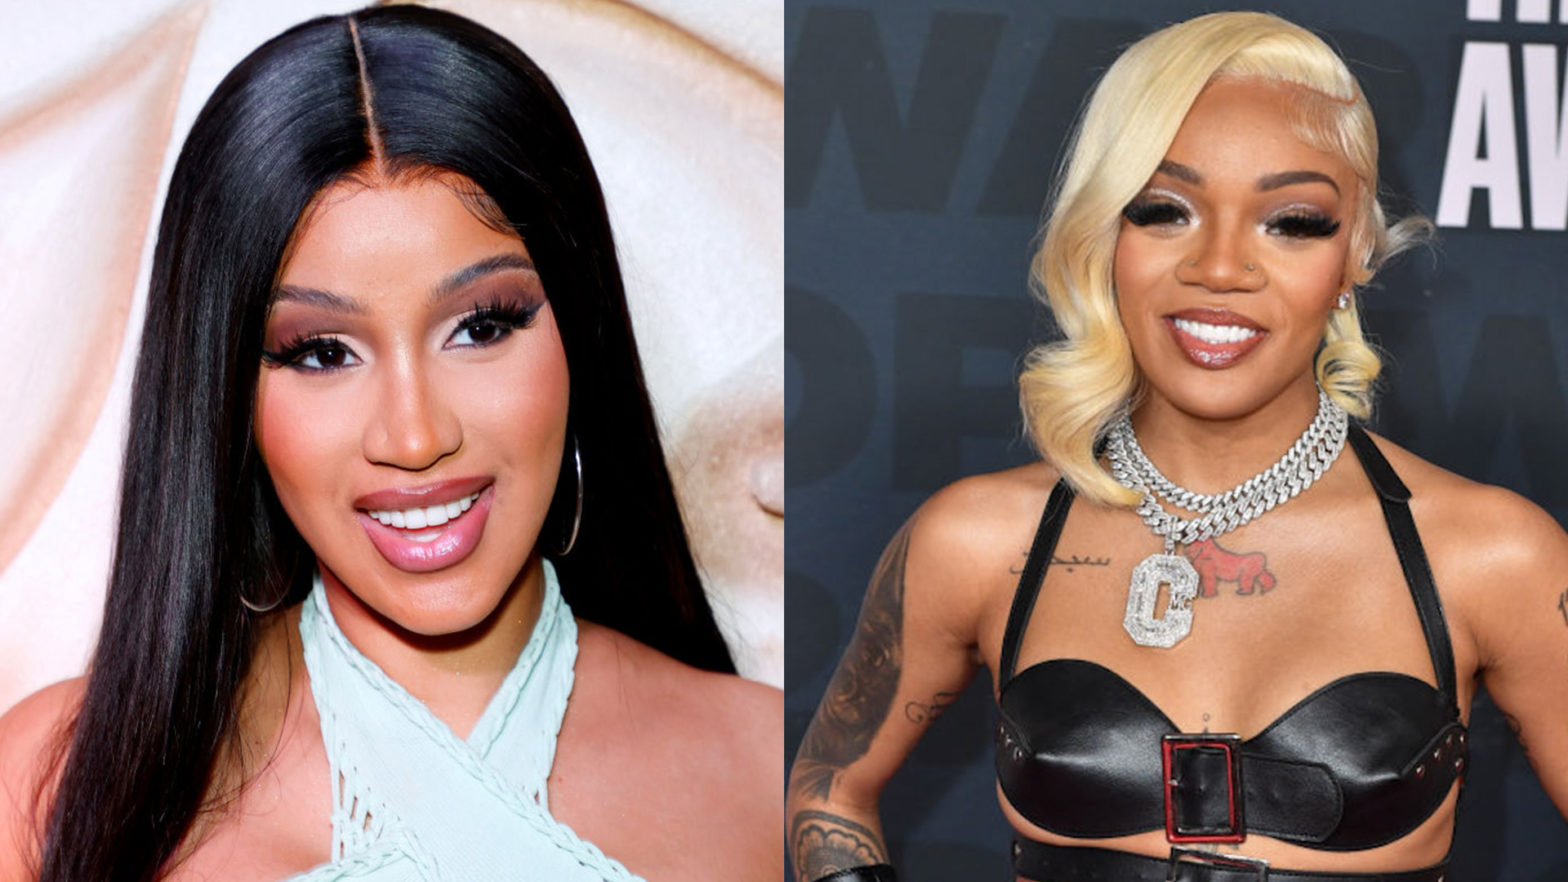 Cardi B And GloRilla Dominate TikTok With Over 125,000 Videos In Less Than A Month, Reminding Us That There's Strength In Numbers